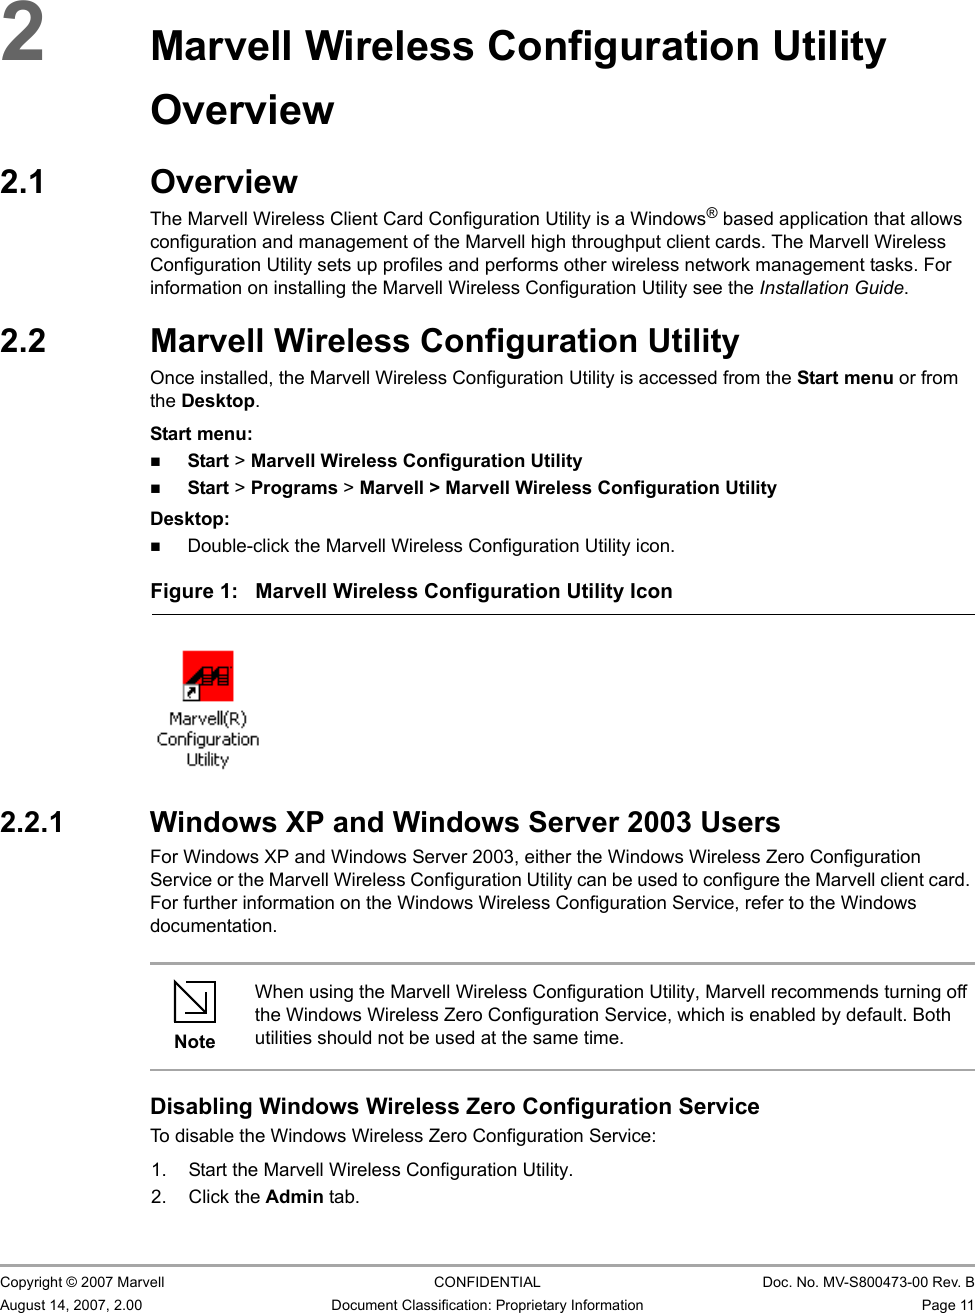 Marvell Wireless Configuration Utility OverviewOverview                         Copyright © 2007 Marvell CONFIDENTIAL Doc. No. MV-S800473-00 Rev. BAugust 14, 2007, 2.00 Document Classification: Proprietary Information Page 11 2Marvell Wireless Configuration Utility Overview2.1 OverviewThe Marvell Wireless Client Card Configuration Utility is a Windows® based application that allows configuration and management of the Marvell high throughput client cards. The Marvell Wireless Configuration Utility sets up profiles and performs other wireless network management tasks. For information on installing the Marvell Wireless Configuration Utility see the Installation Guide.2.2 Marvell Wireless Configuration UtilityOnce installed, the Marvell Wireless Configuration Utility is accessed from the Start menu or from the Desktop.Start menu:Start &gt; Marvell Wireless Configuration UtilityStart &gt; Programs &gt; Marvell &gt; Marvell Wireless Configuration UtilityDesktop:Double-click the Marvell Wireless Configuration Utility icon.2.2.1 Windows XP and Windows Server 2003 UsersFor Windows XP and Windows Server 2003, either the Windows Wireless Zero Configuration Service or the Marvell Wireless Configuration Utility can be used to configure the Marvell client card. For further information on the Windows Wireless Configuration Service, refer to the Windows documentation.Disabling Windows Wireless Zero Configuration ServiceTo disable the Windows Wireless Zero Configuration Service:1. Start the Marvell Wireless Configuration Utility.2. Click the Admin tab.Figure 1: Marvell Wireless Configuration Utility Icon                         NoteWhen using the Marvell Wireless Configuration Utility, Marvell recommends turning off the Windows Wireless Zero Configuration Service, which is enabled by default. Both utilities should not be used at the same time.